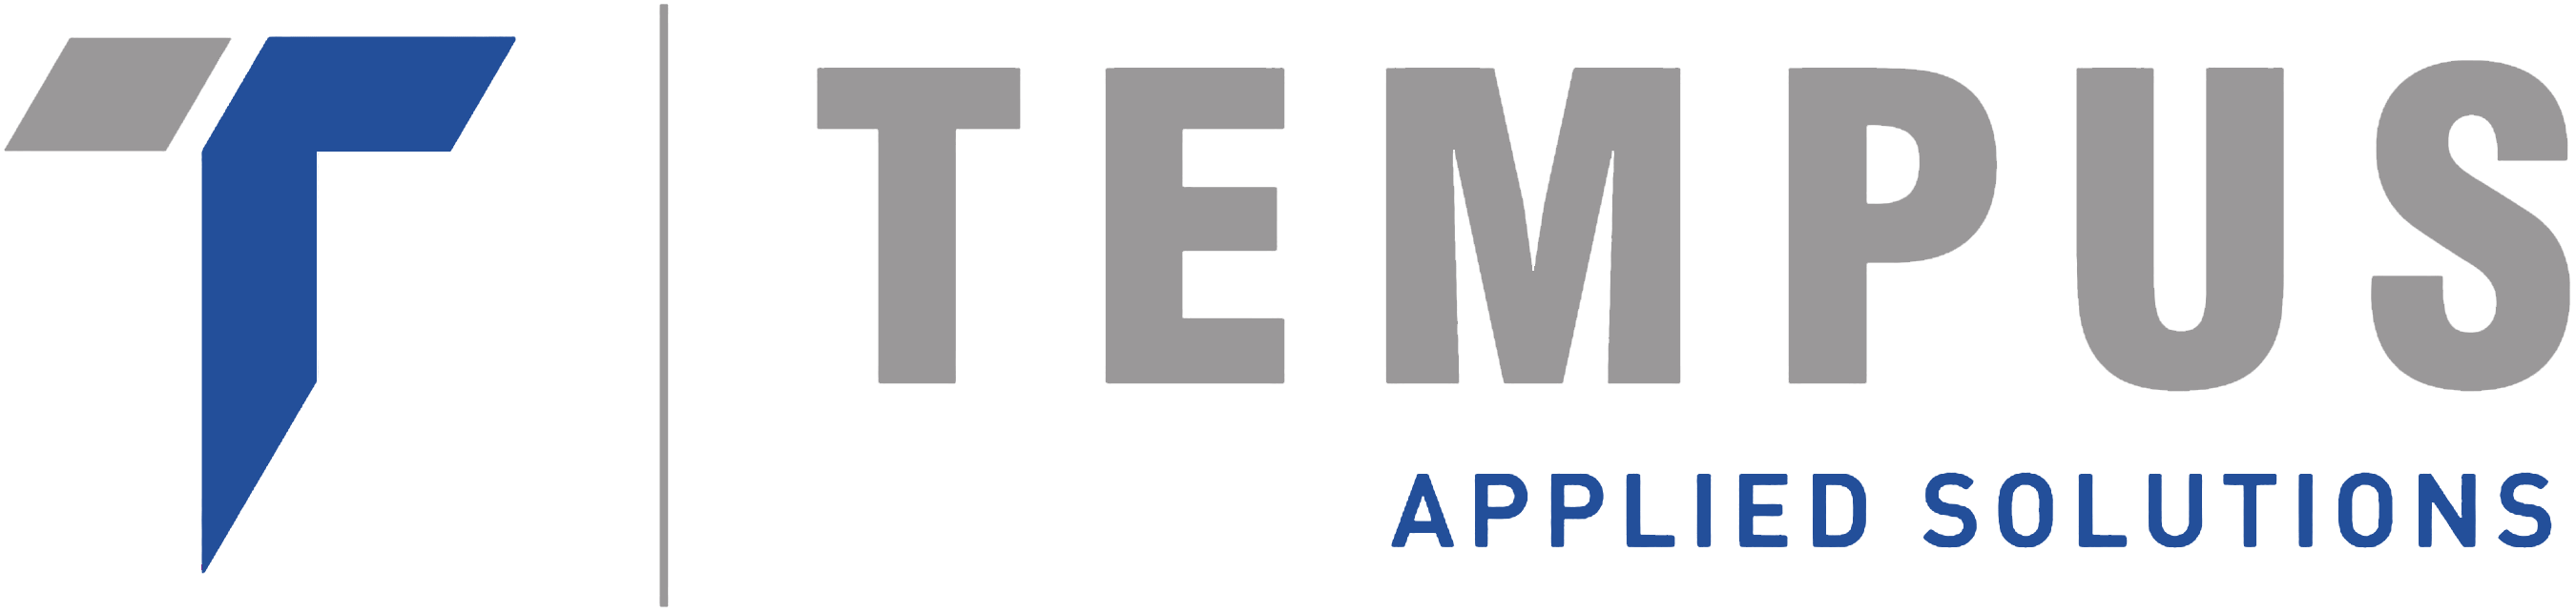 Tempus Applied Solutions Holdings, Inc. (TMPS) 